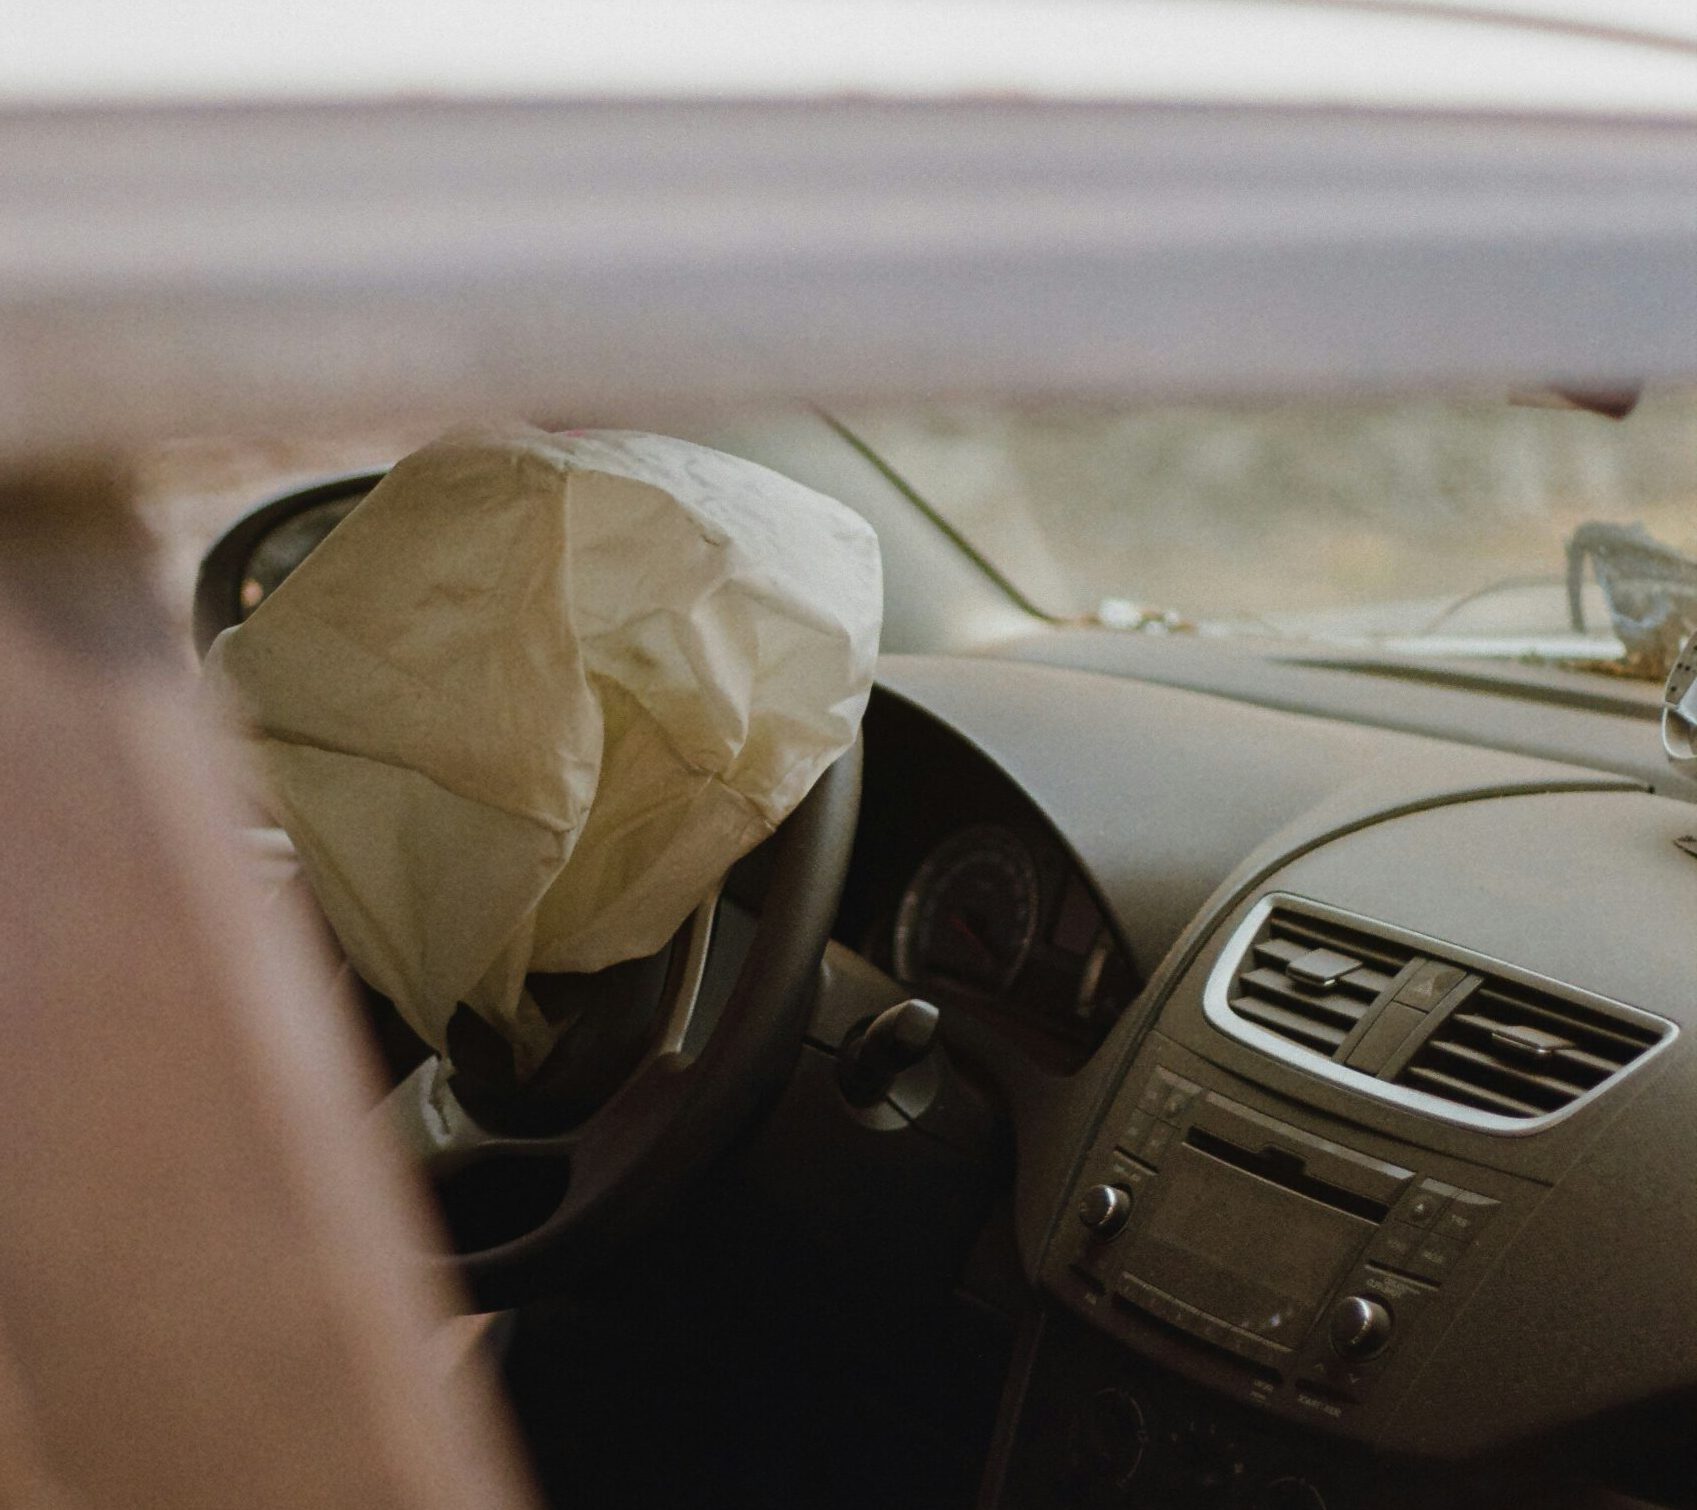 Takada Airbag Recall Still a Concern for Over 6.4 Million US Cars | THE SHOP